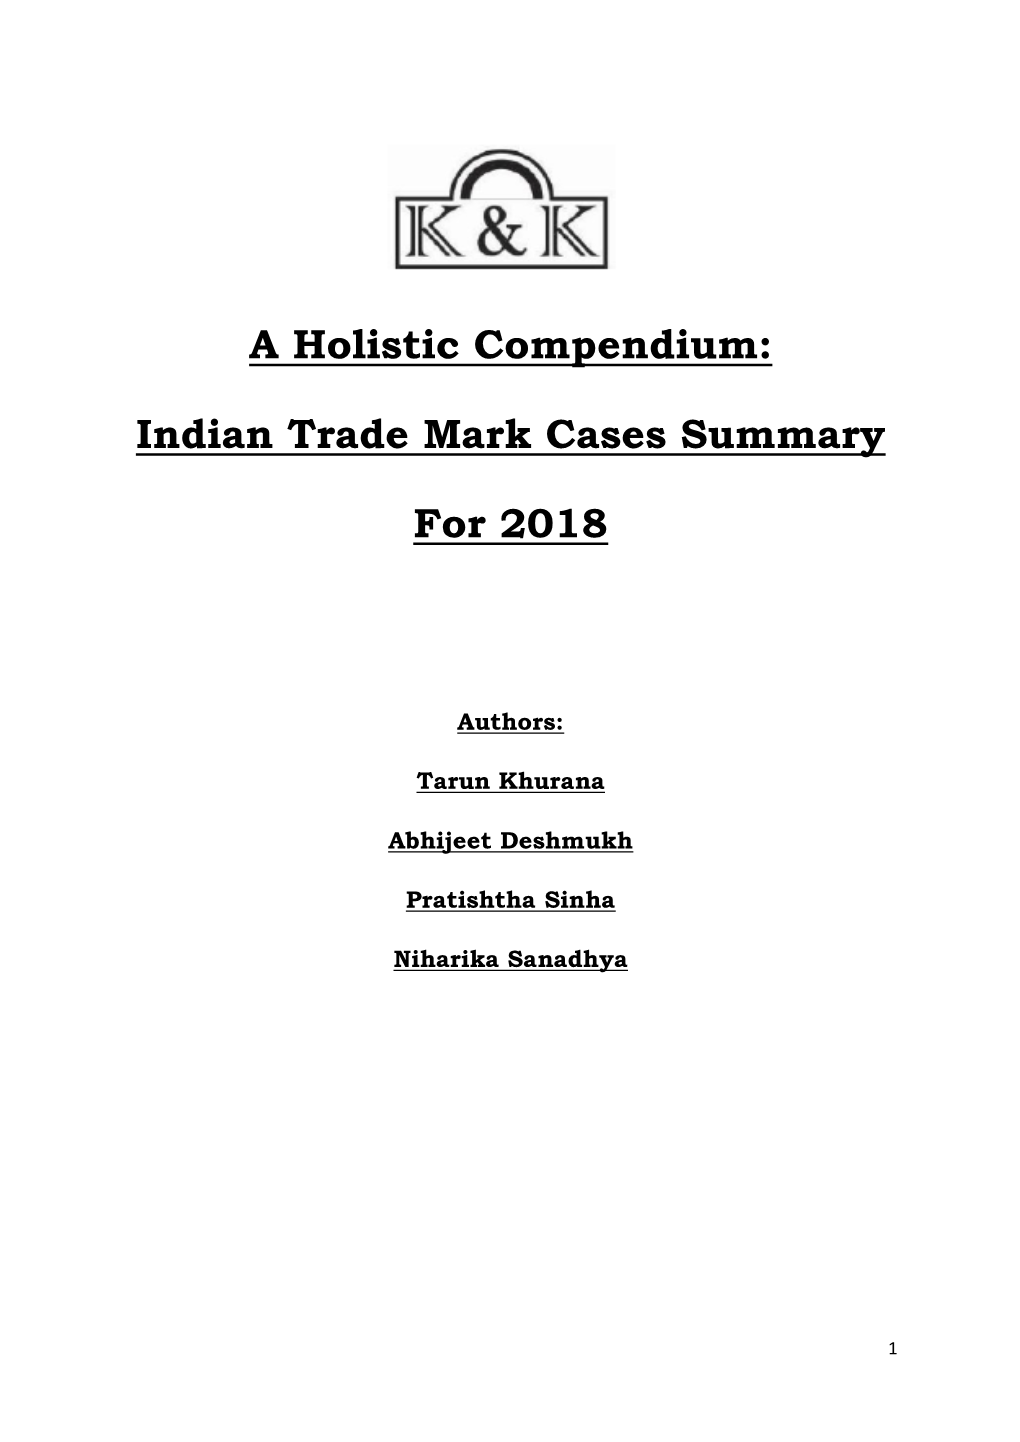 A Holistic Compendium: Indian Trade Mark Cases Summary for 2018